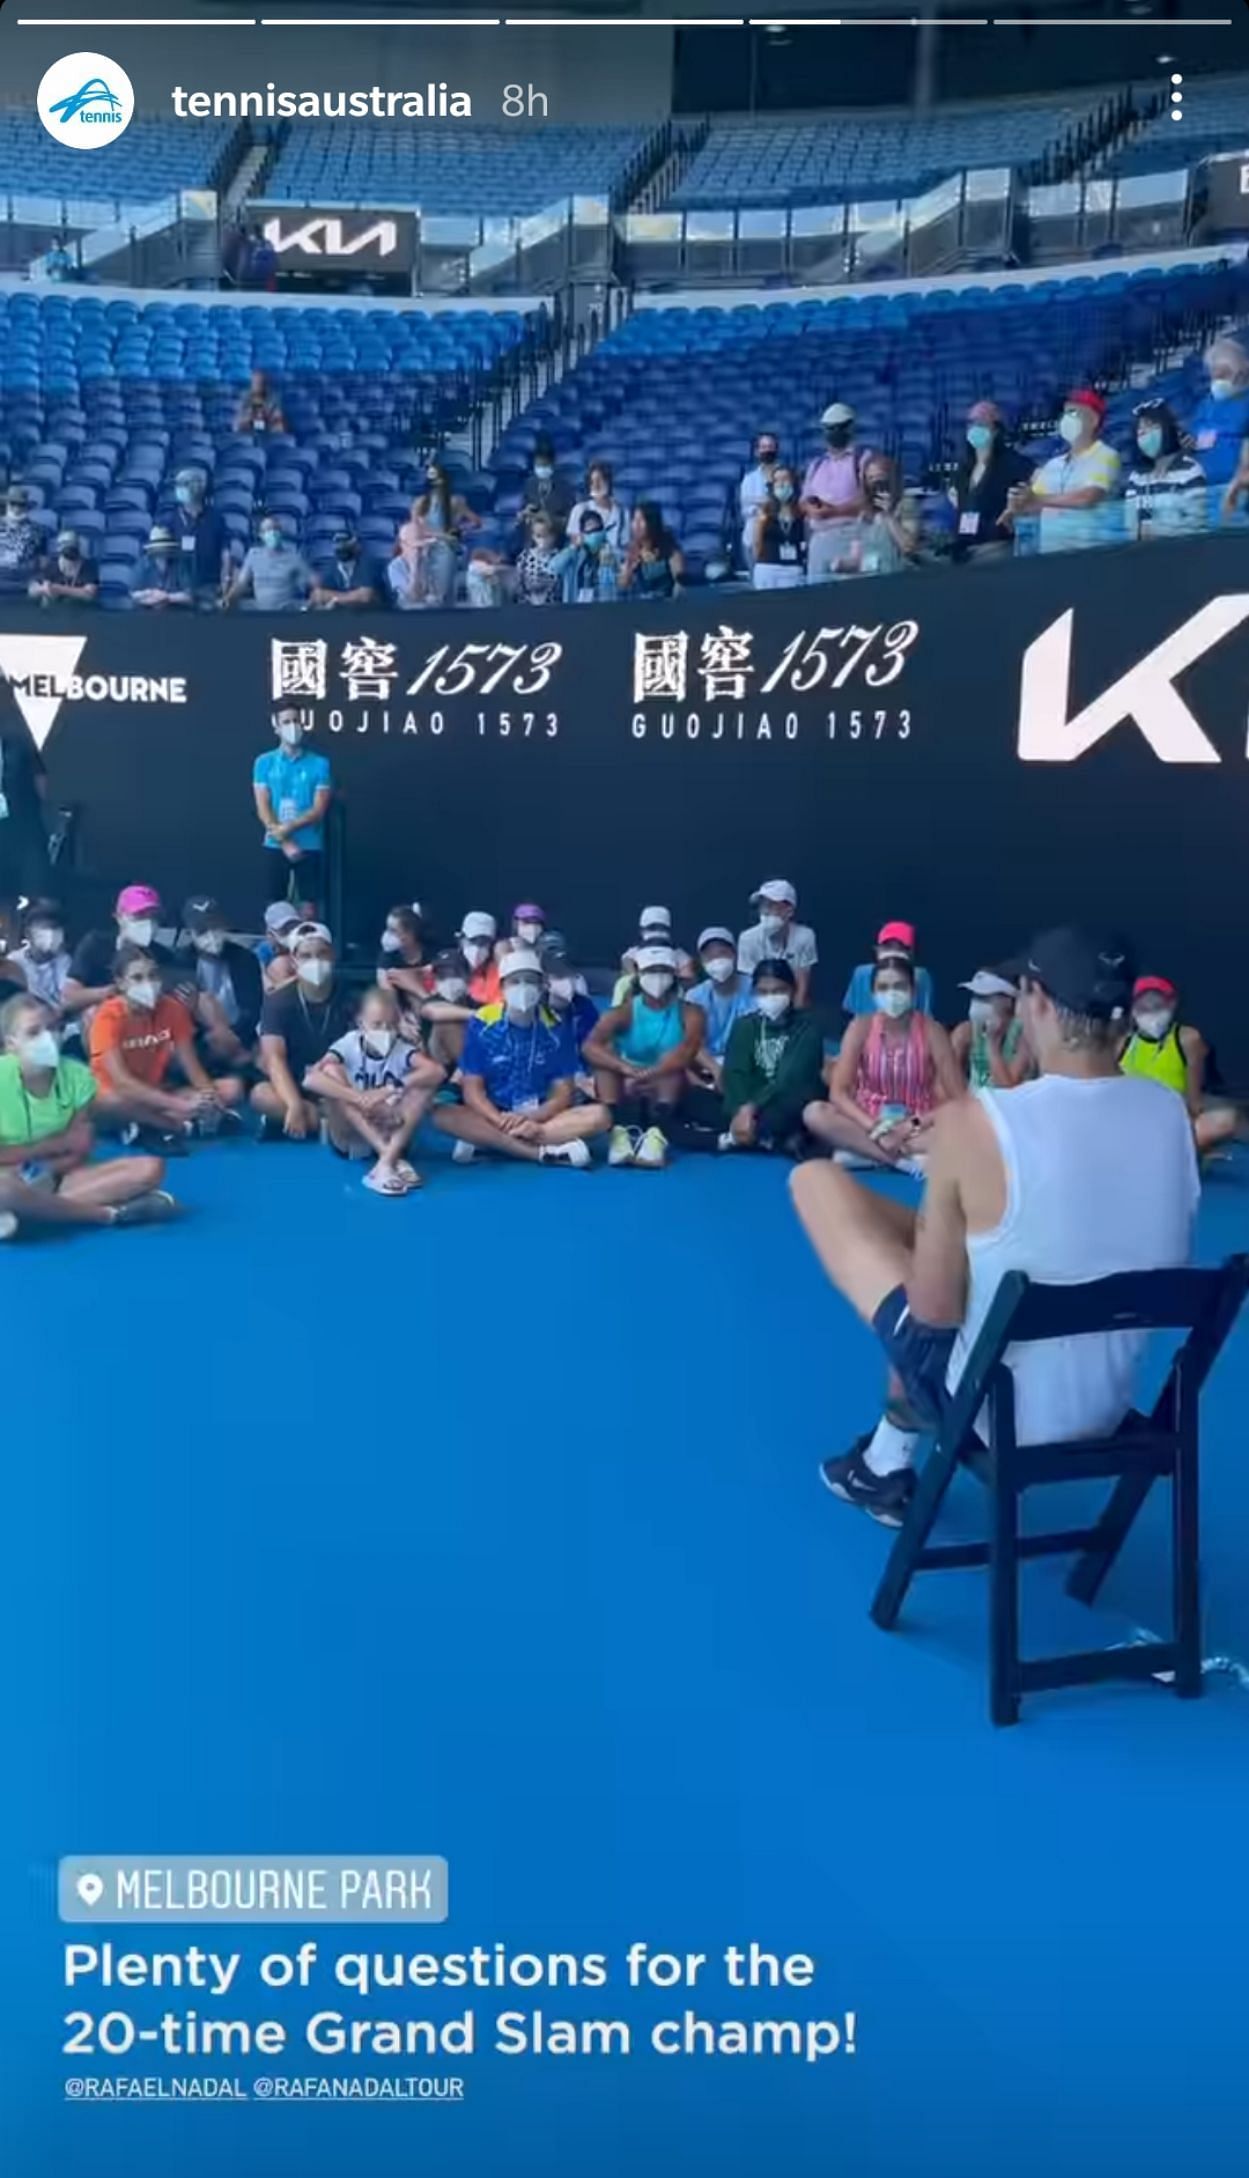 Nadal can be seen taking questions from the kids at the Rod Laver Arena in Melbourne